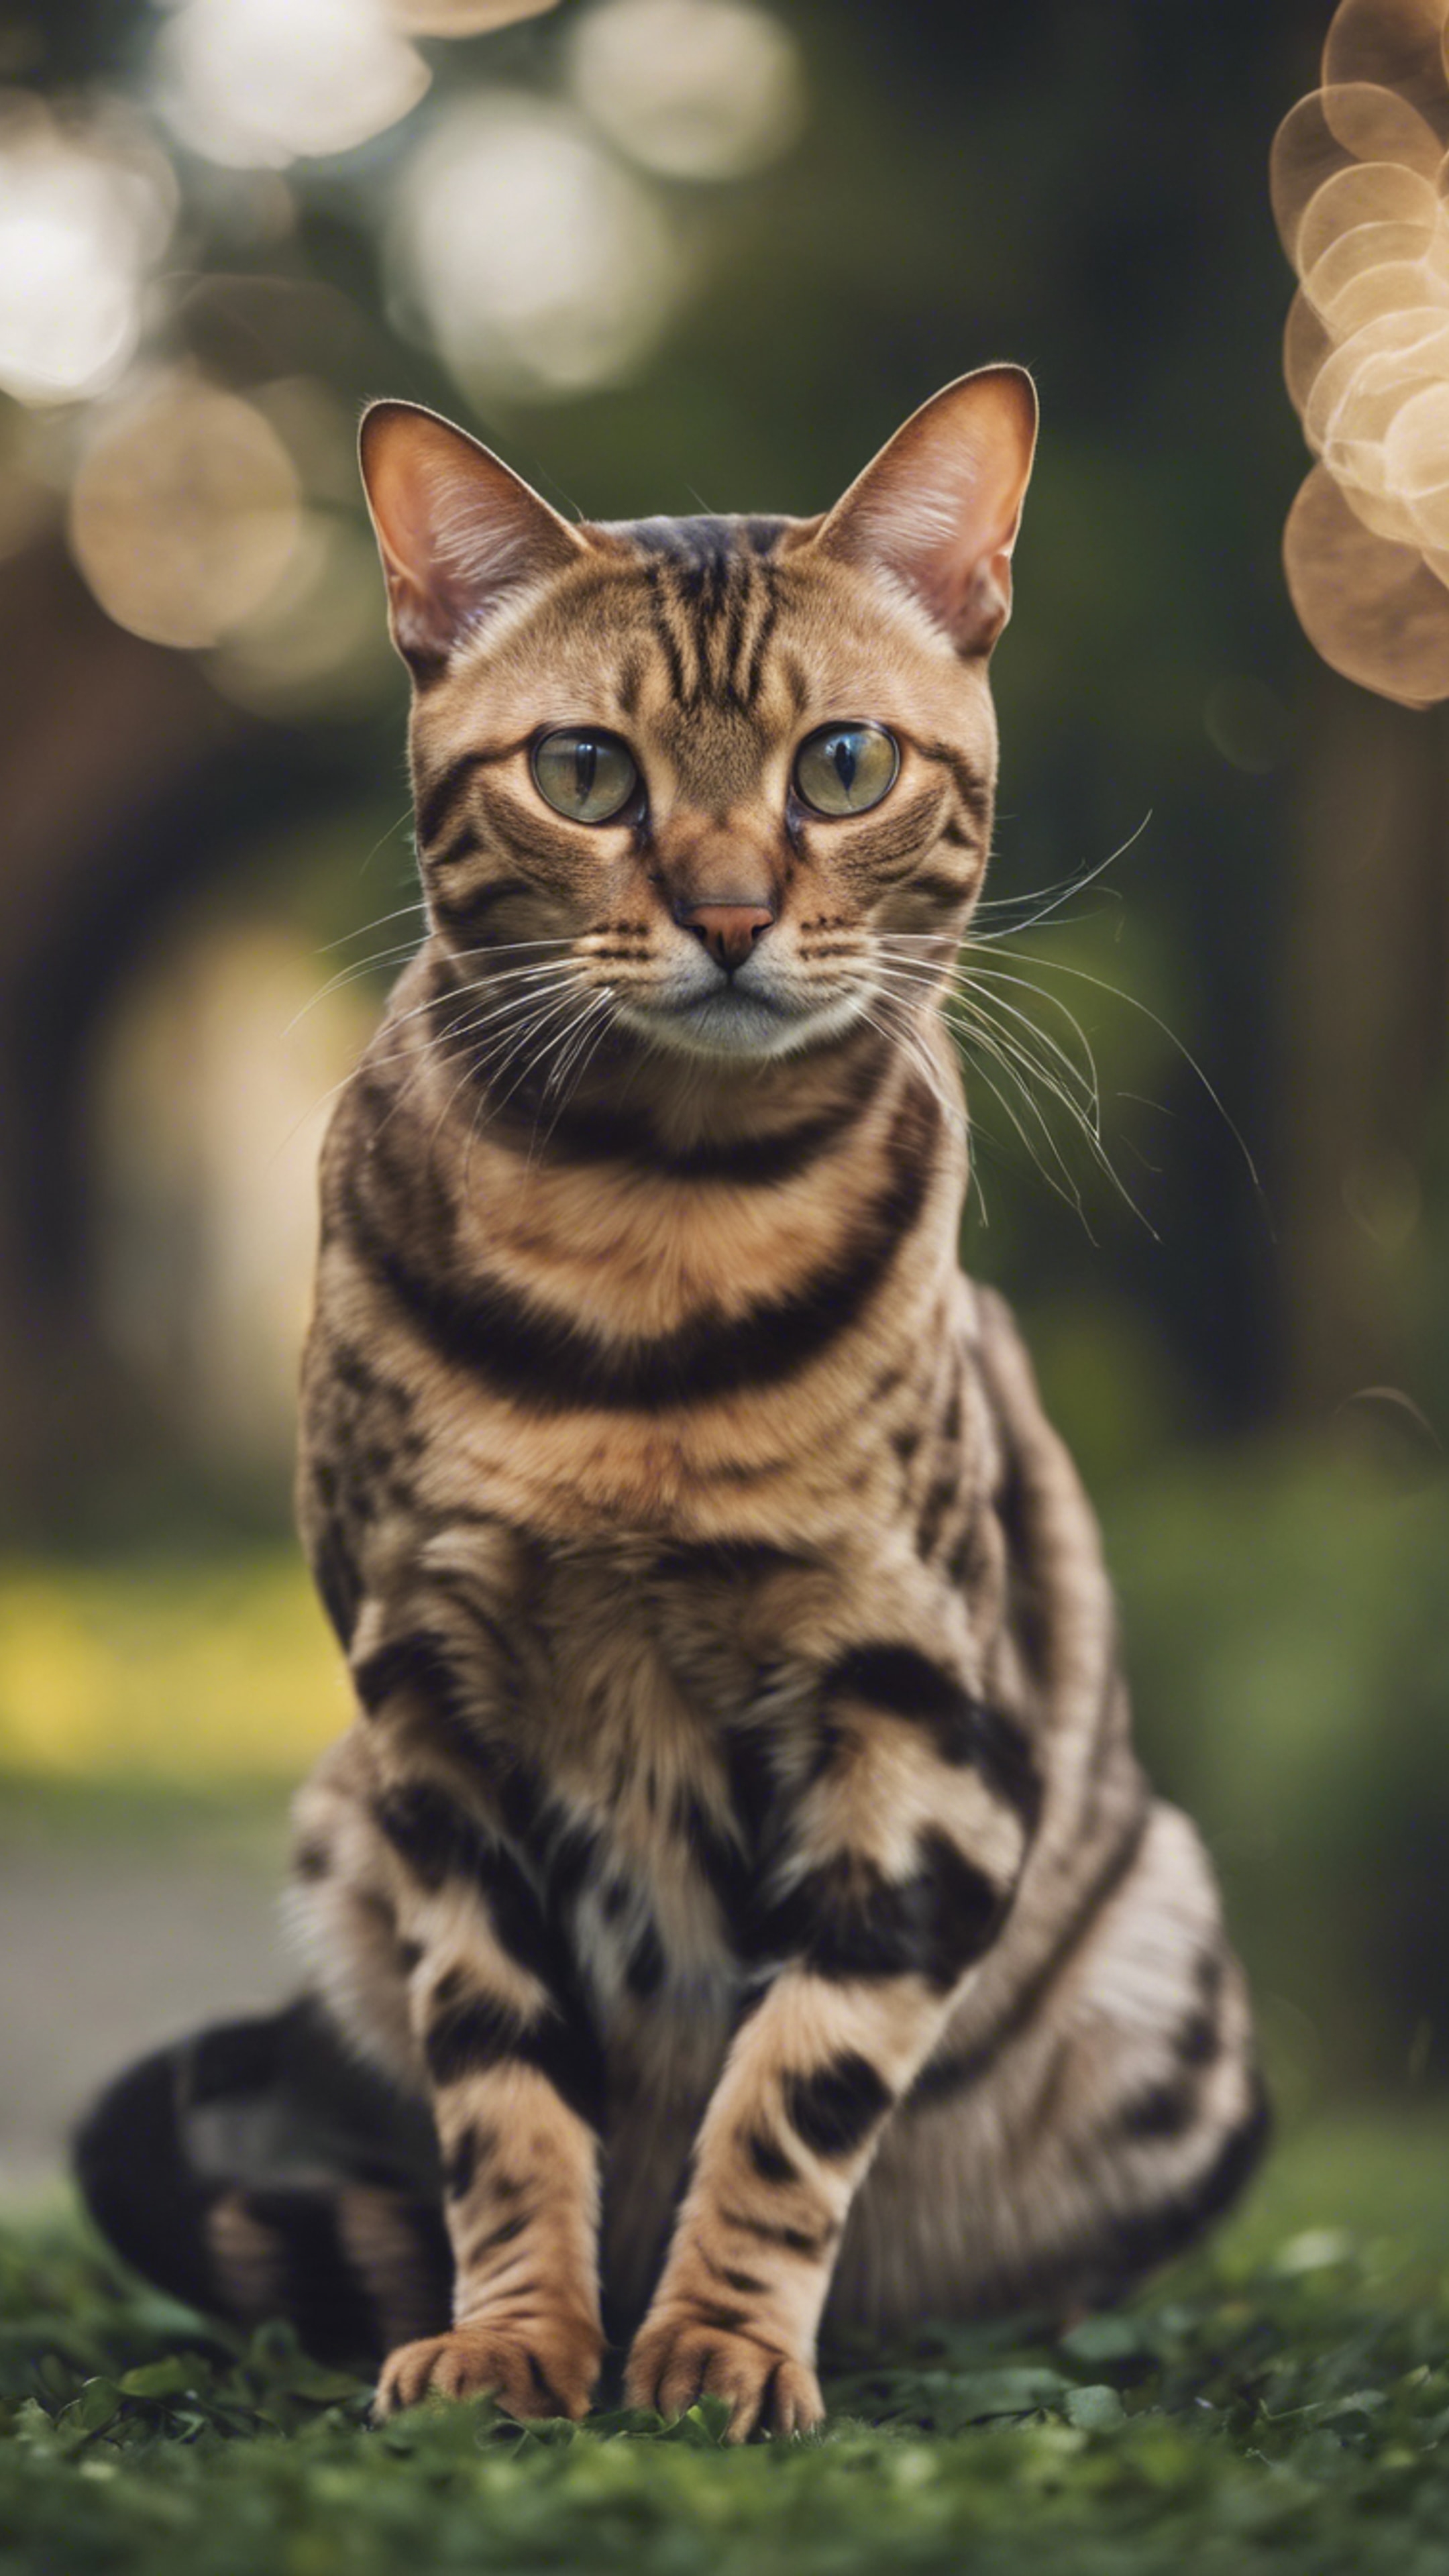 A sleek, aristocratic Bengal cat royally ignoring a mouse scampering by. Fondo de pantalla[9f7ab84a7c6b485a8696]